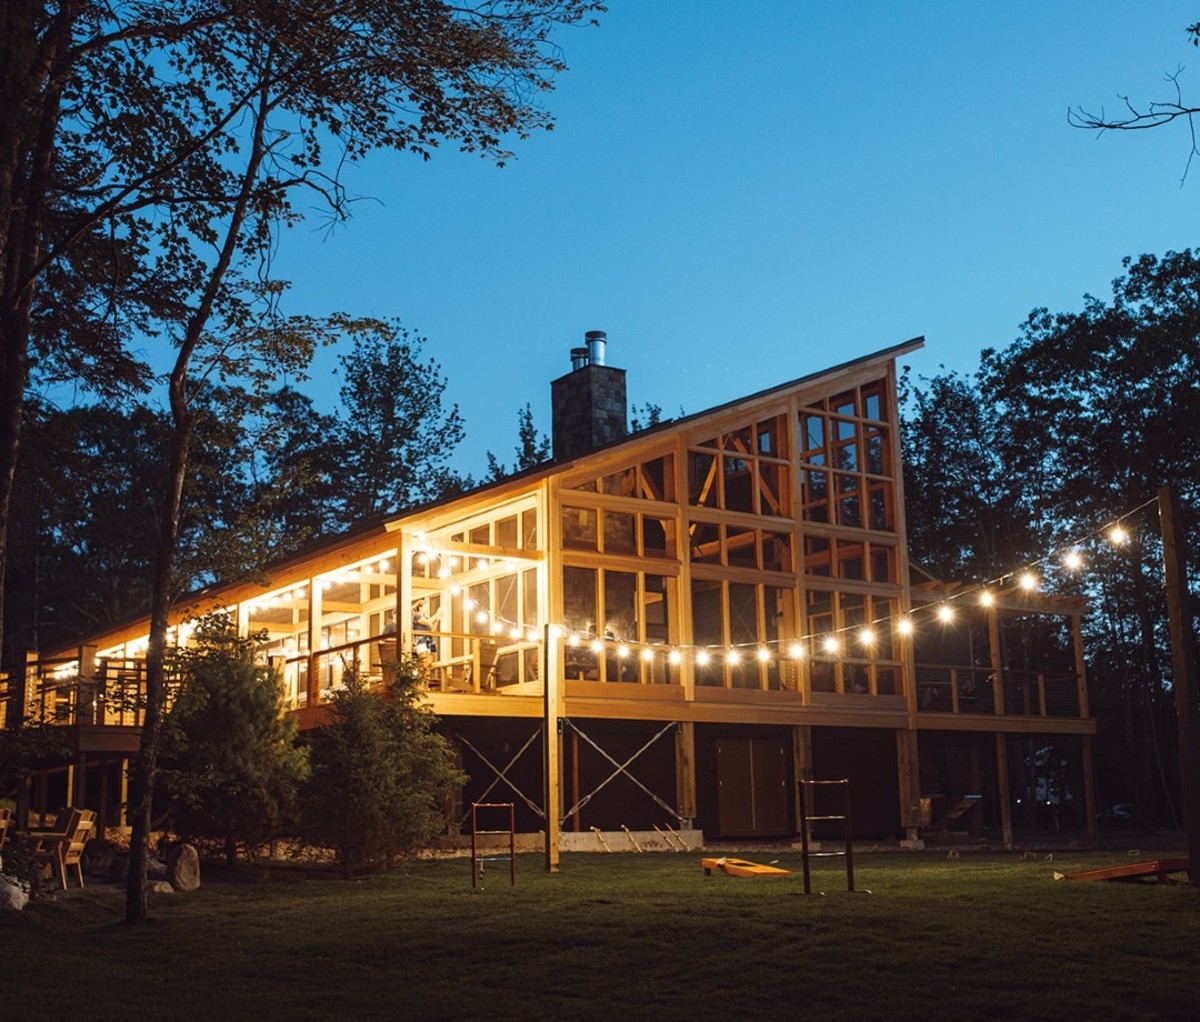 Lodge glamping with fairy lights at night